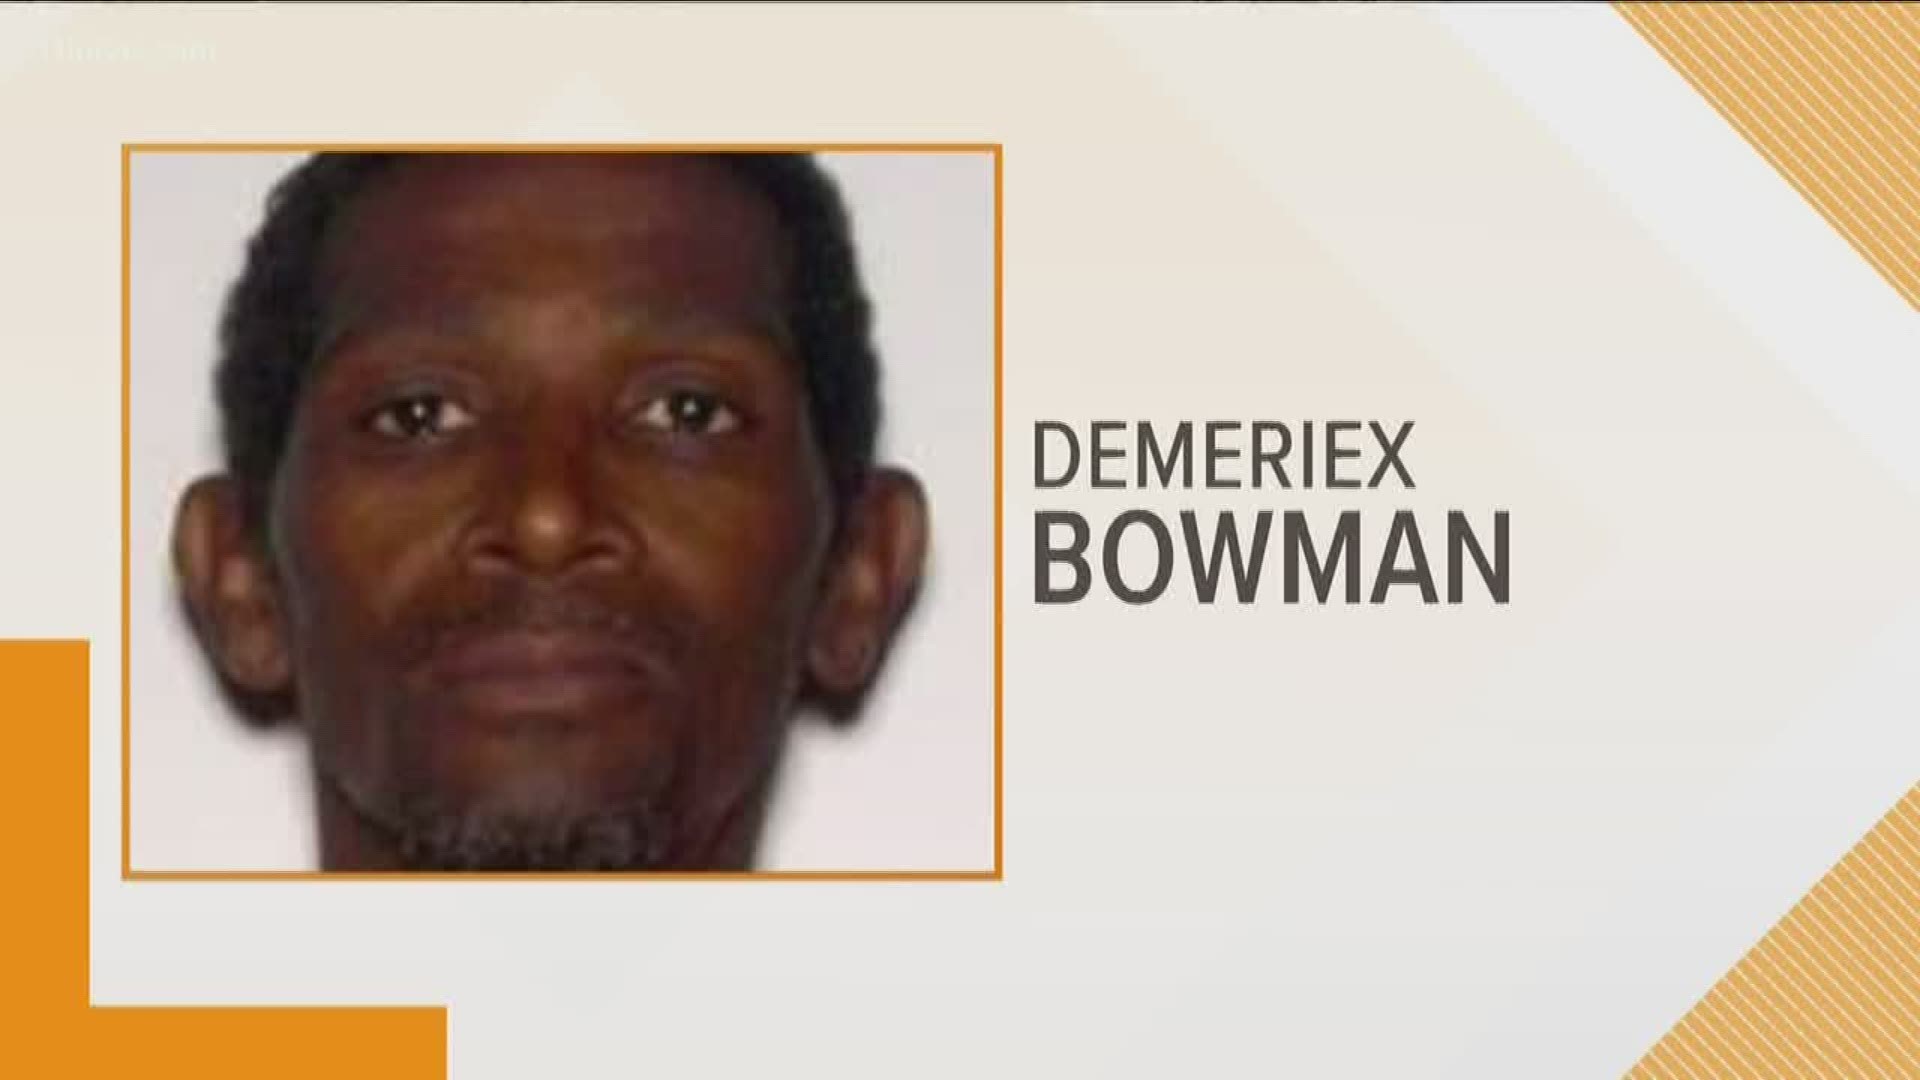 Demeriex Bowman has been arrested by DeKalb County Police. Bowman is charged with murdering his stepson Frederick White at White's Stone Mountain home on Friday.